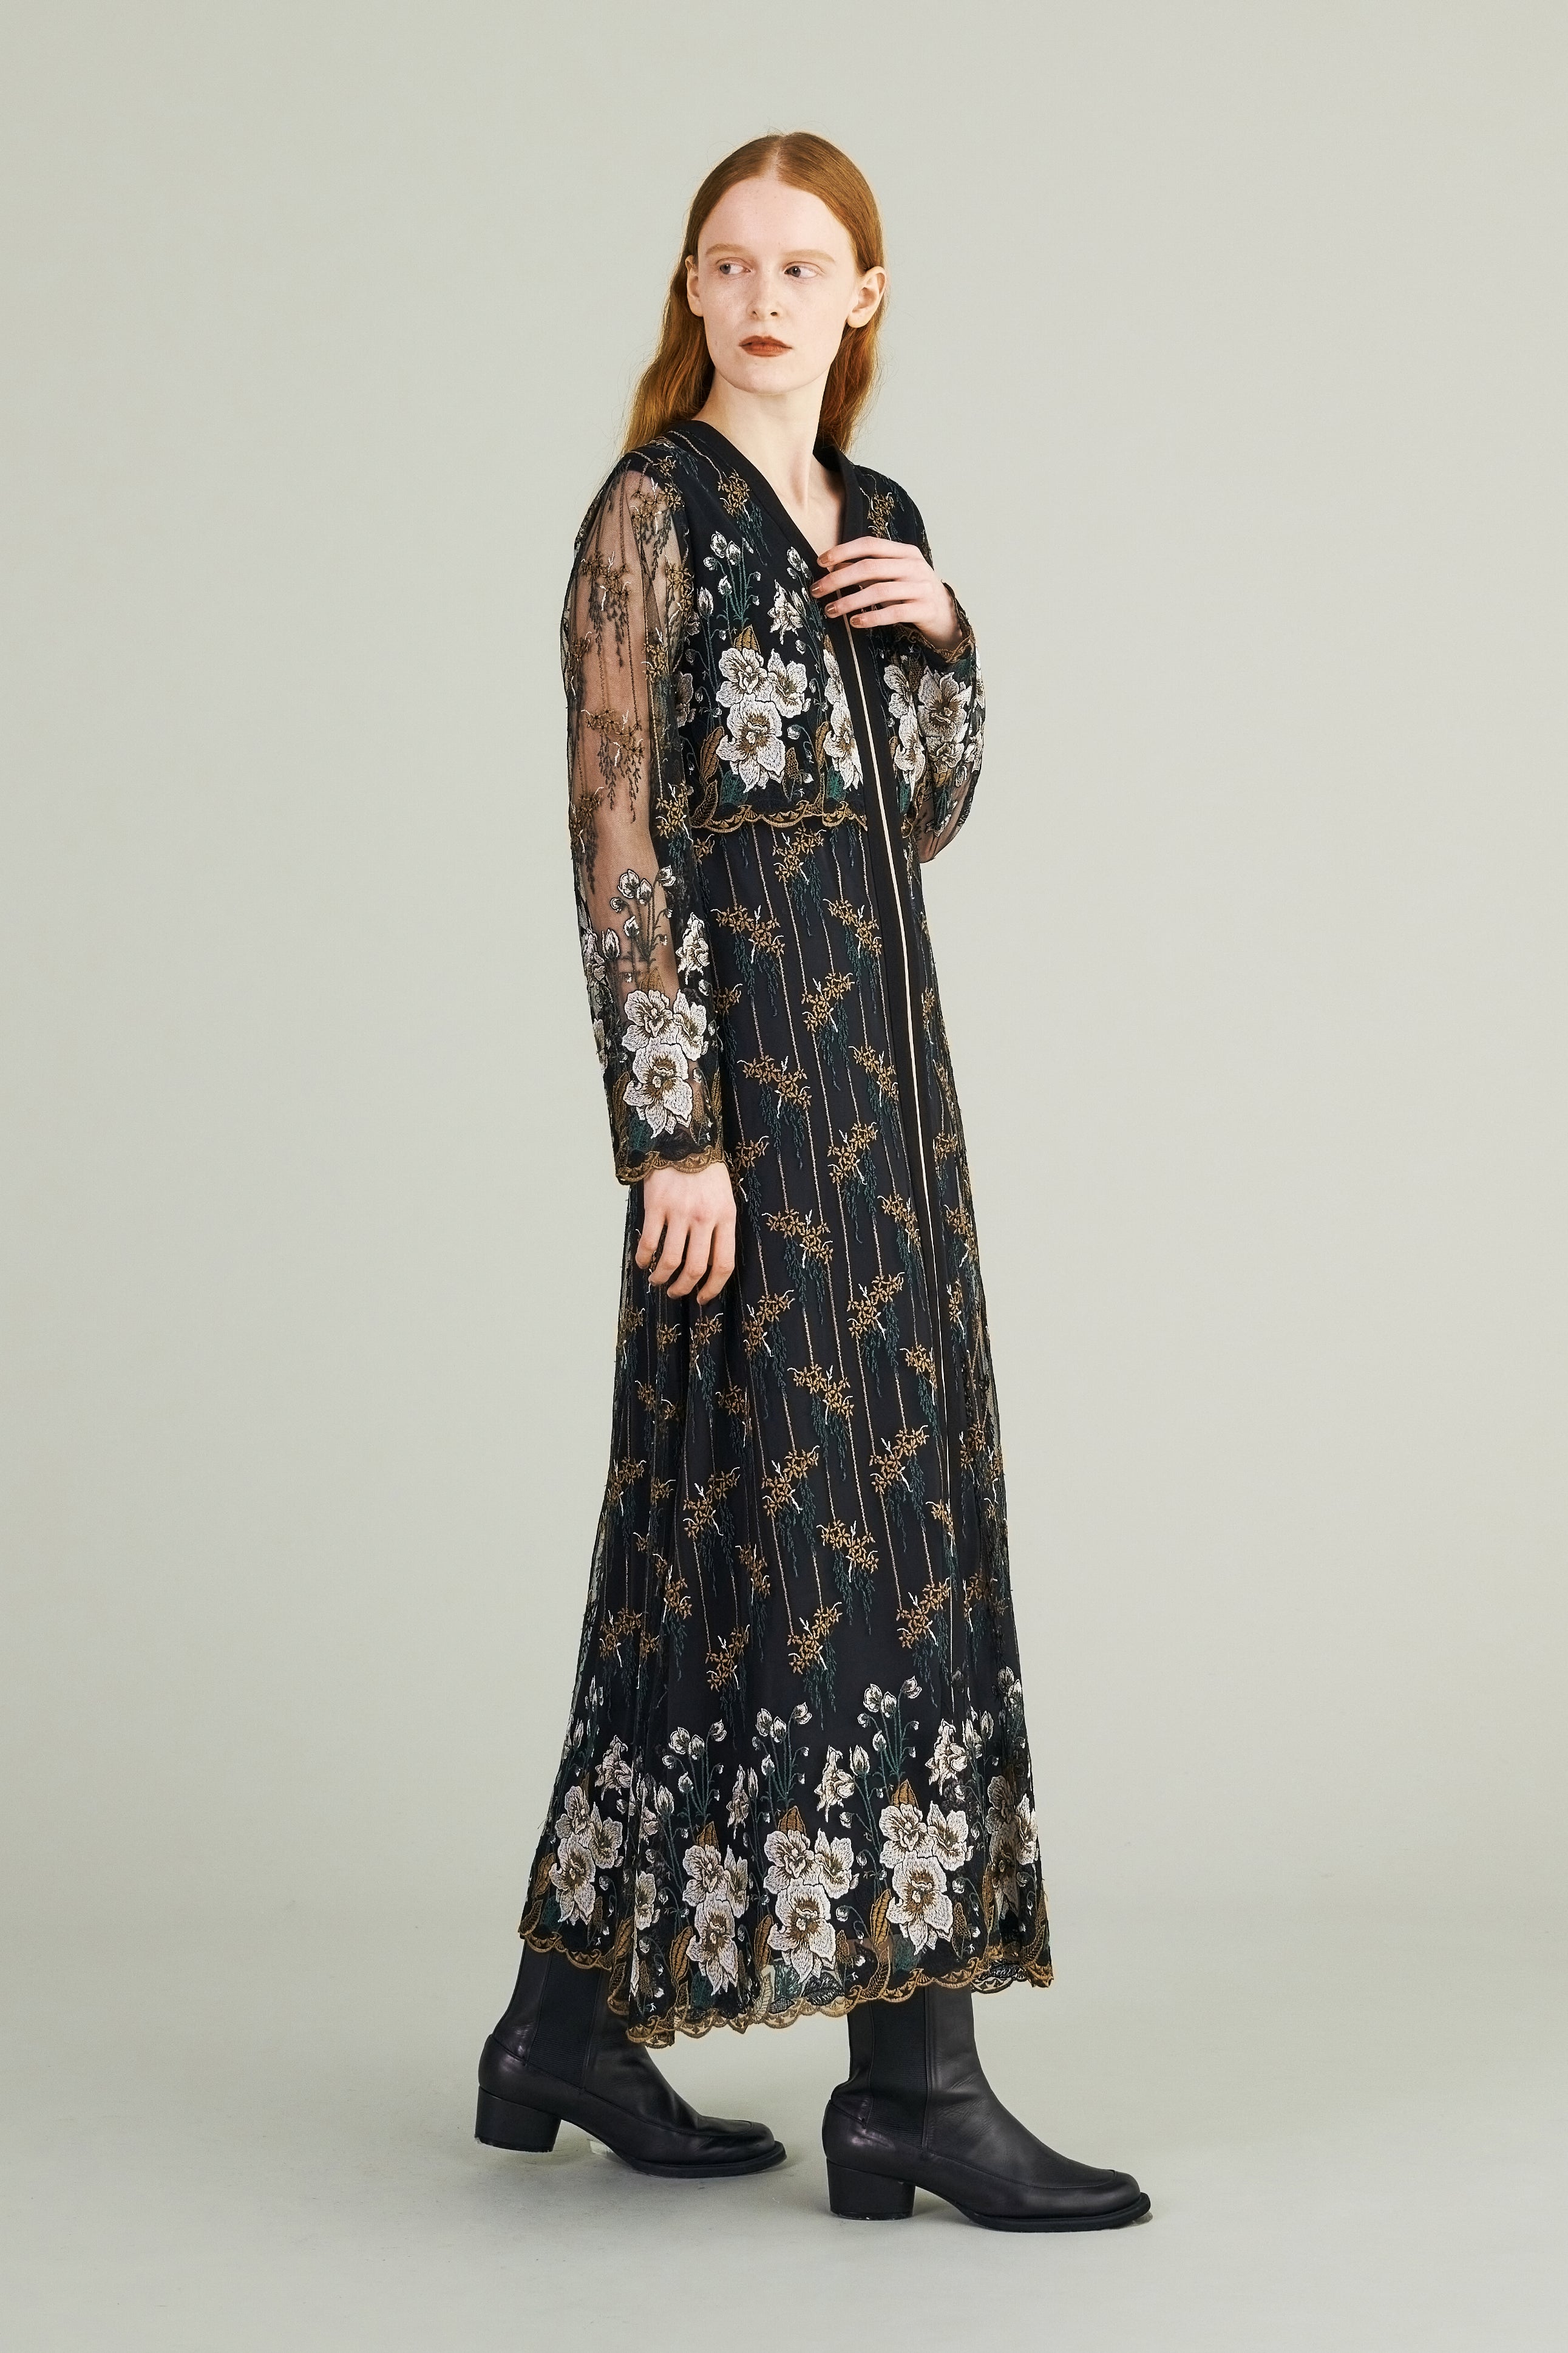 Everlasting embroidery lace dress (Black) – MURRAL